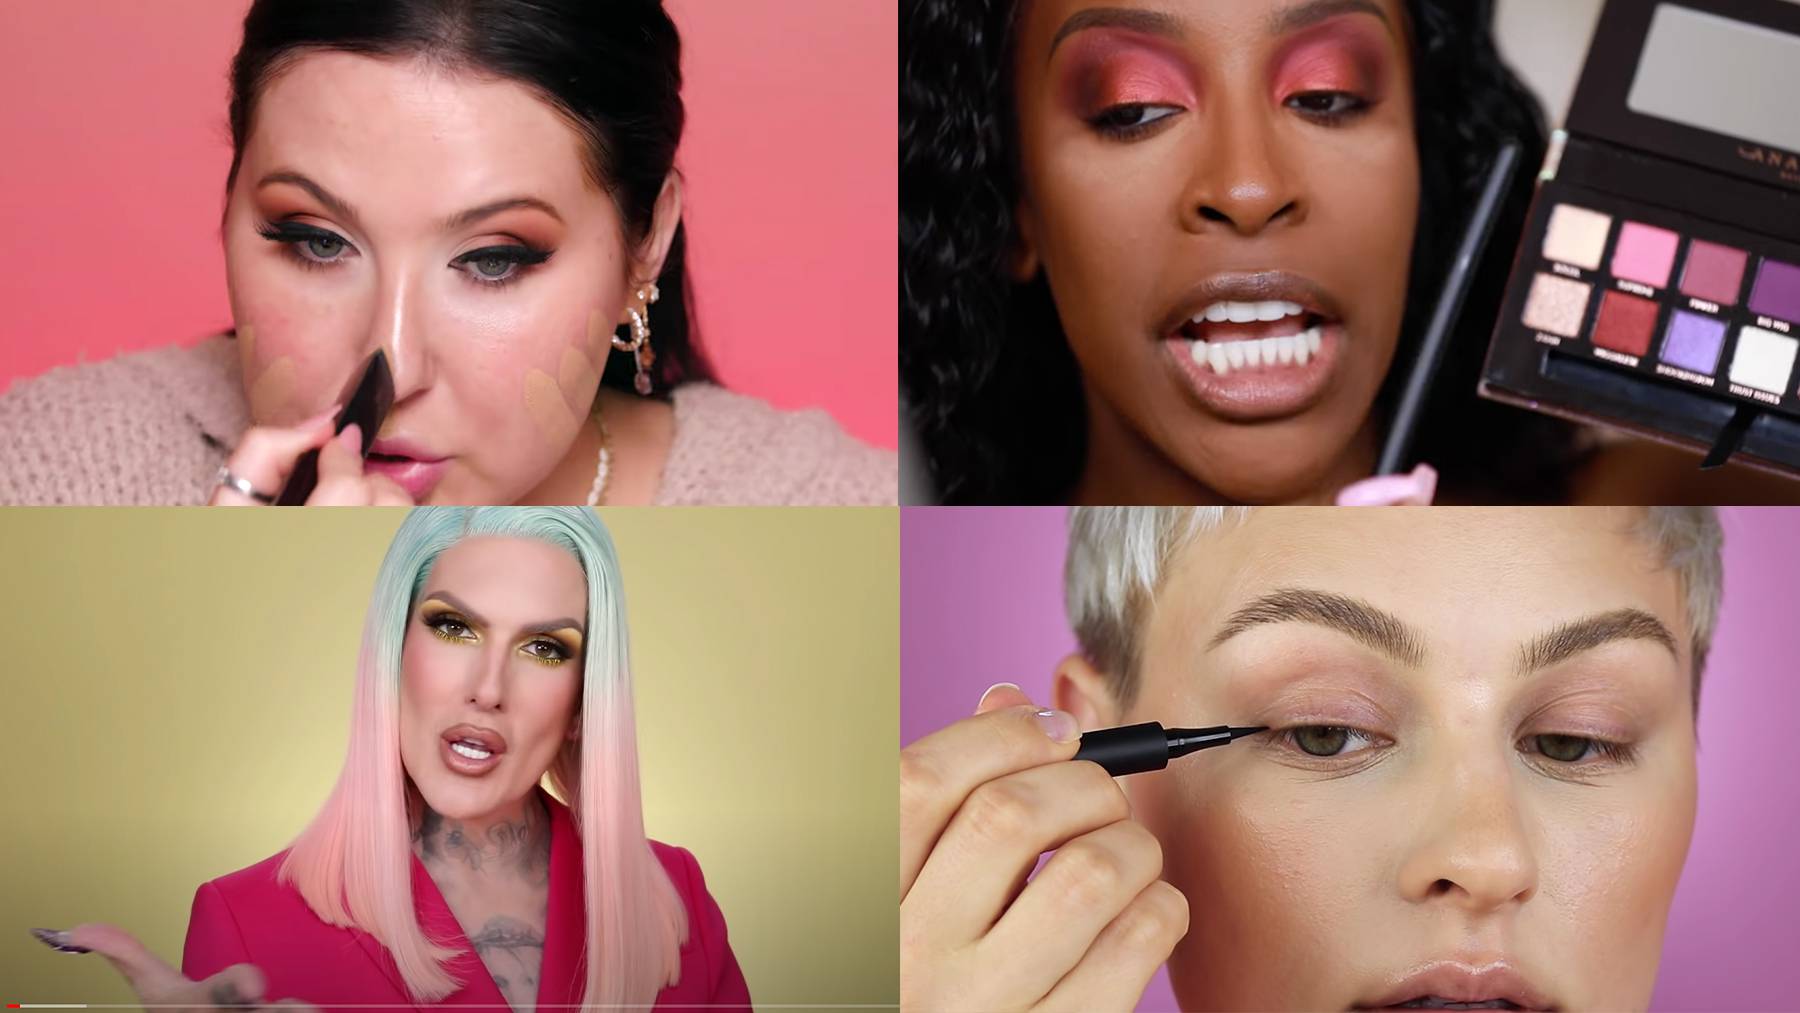 Creators who grew to fame creating beauty content on YouTube are looking elsewhere.